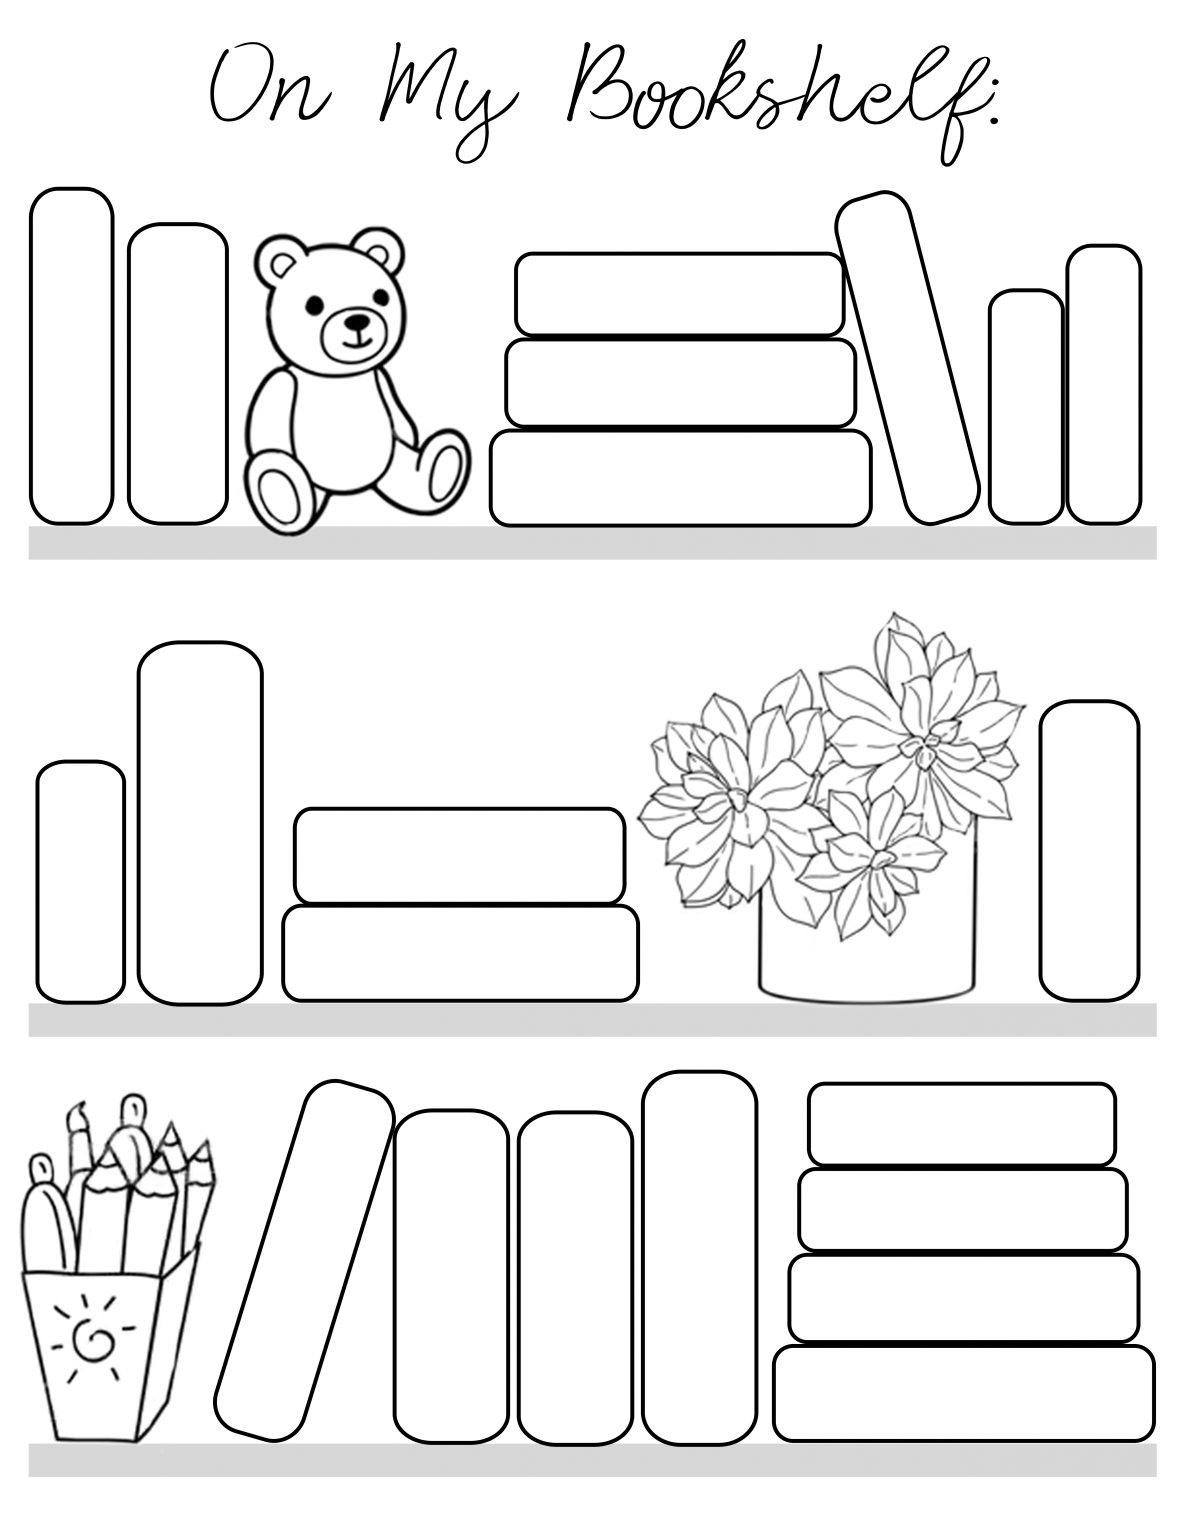 on-my-bookshelf-reading-log-free-printable-and-color-sheet-for-the